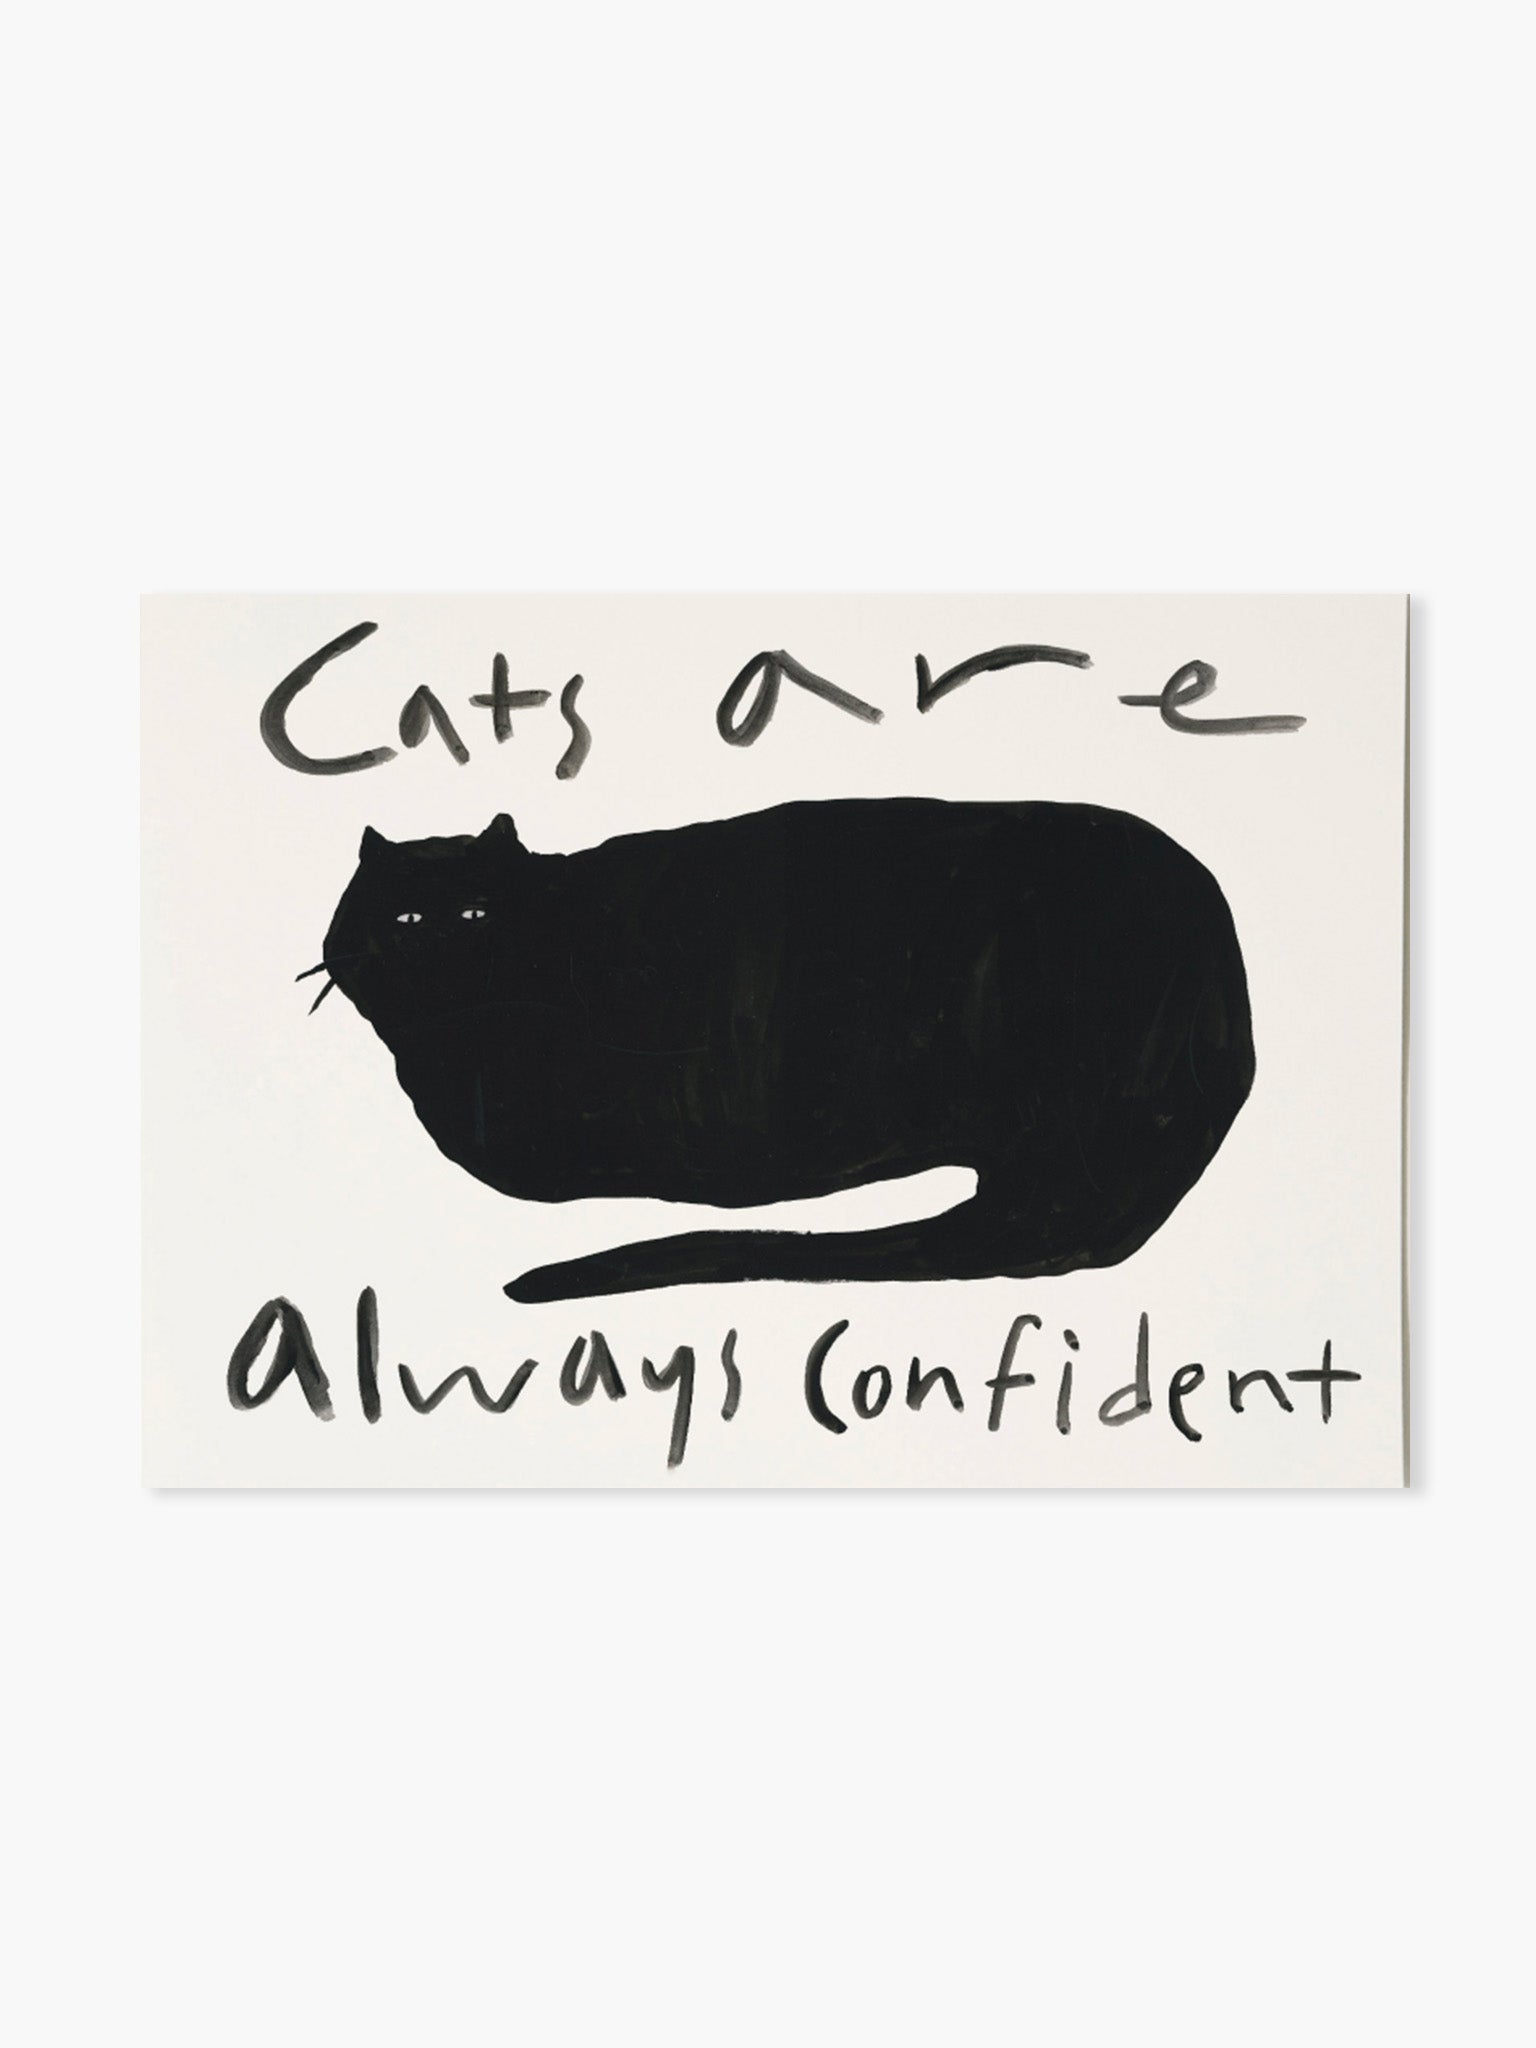 A Confident Cat Poster by grumsarah (A3)